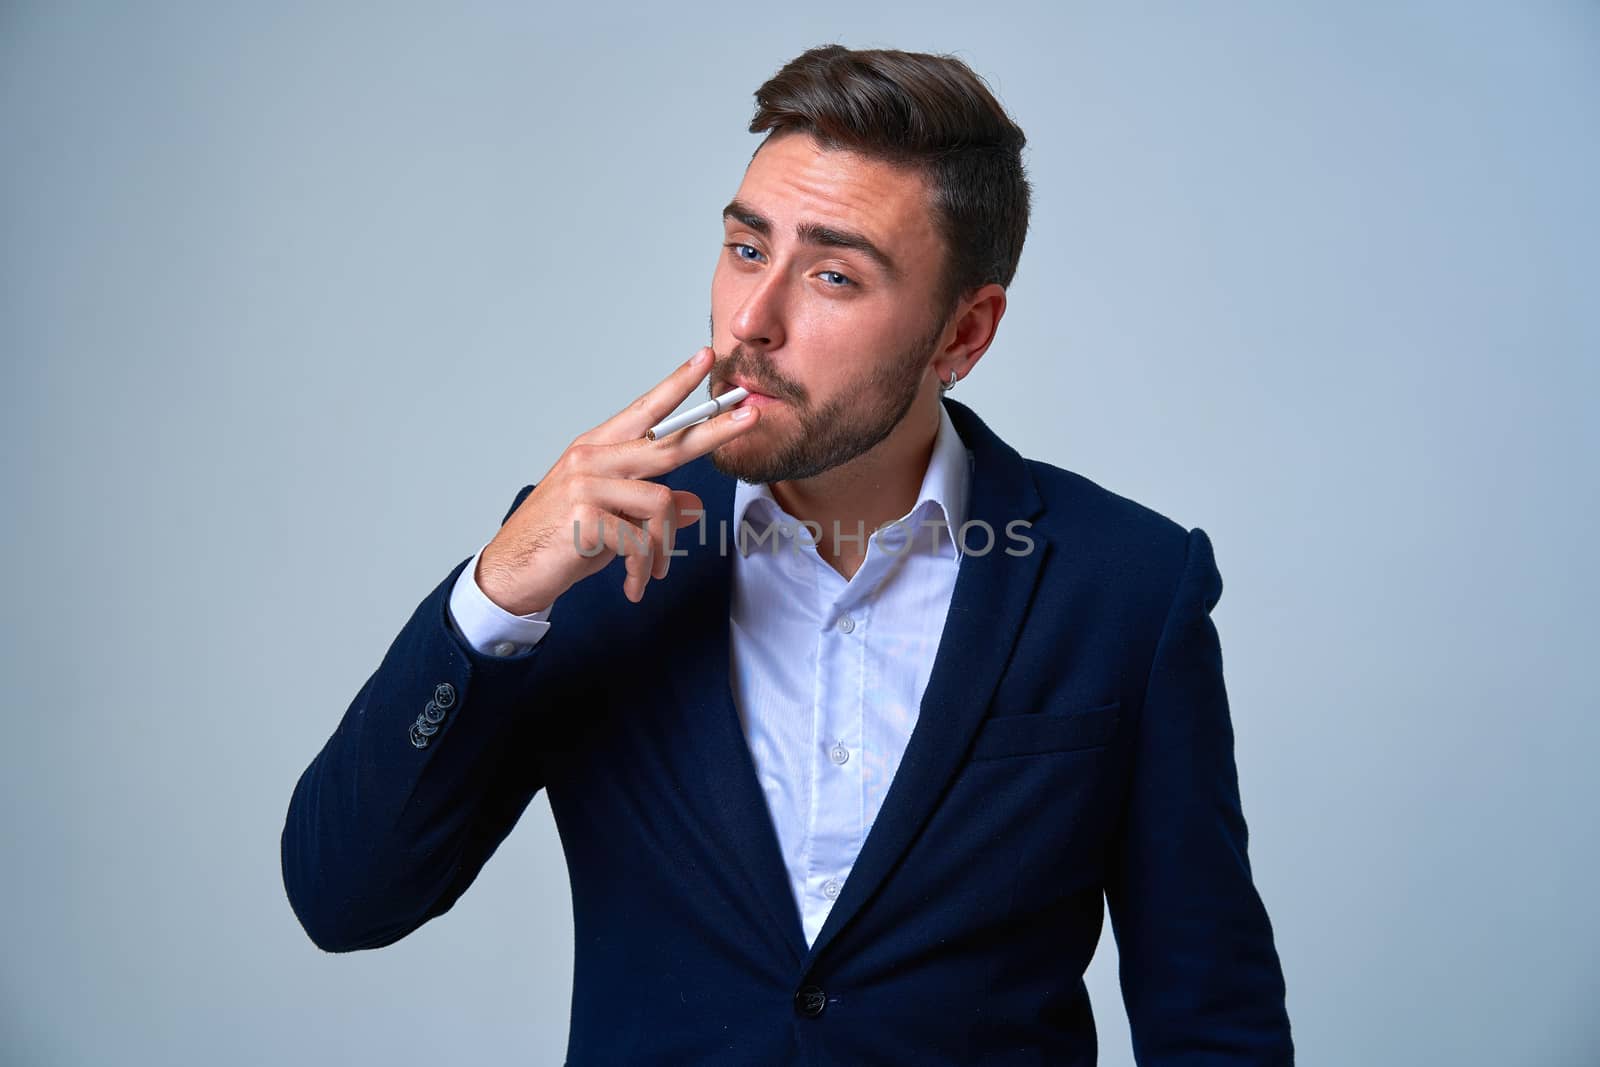 Businessman Business person. Man business suit studio gray background. Modern business person stylish haircut smokes a cigarette Portrait of charming successful young entrepreneur